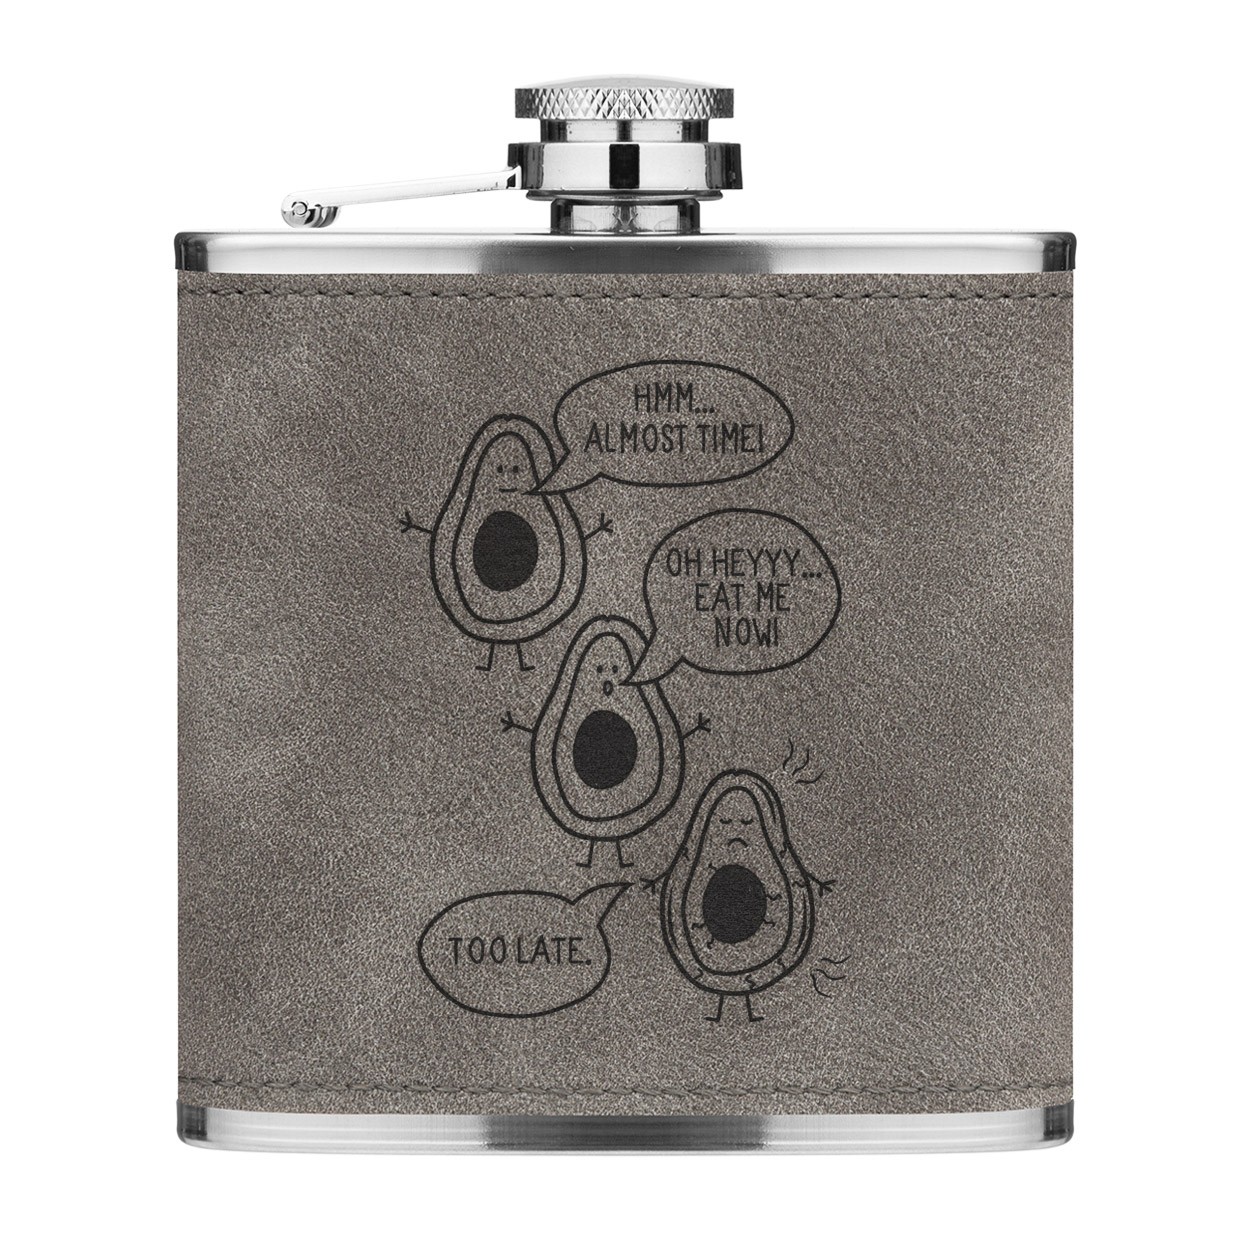 Avocado Eat Me Now Too Late 6oz PU Leather Hip Flask Grey Luxe